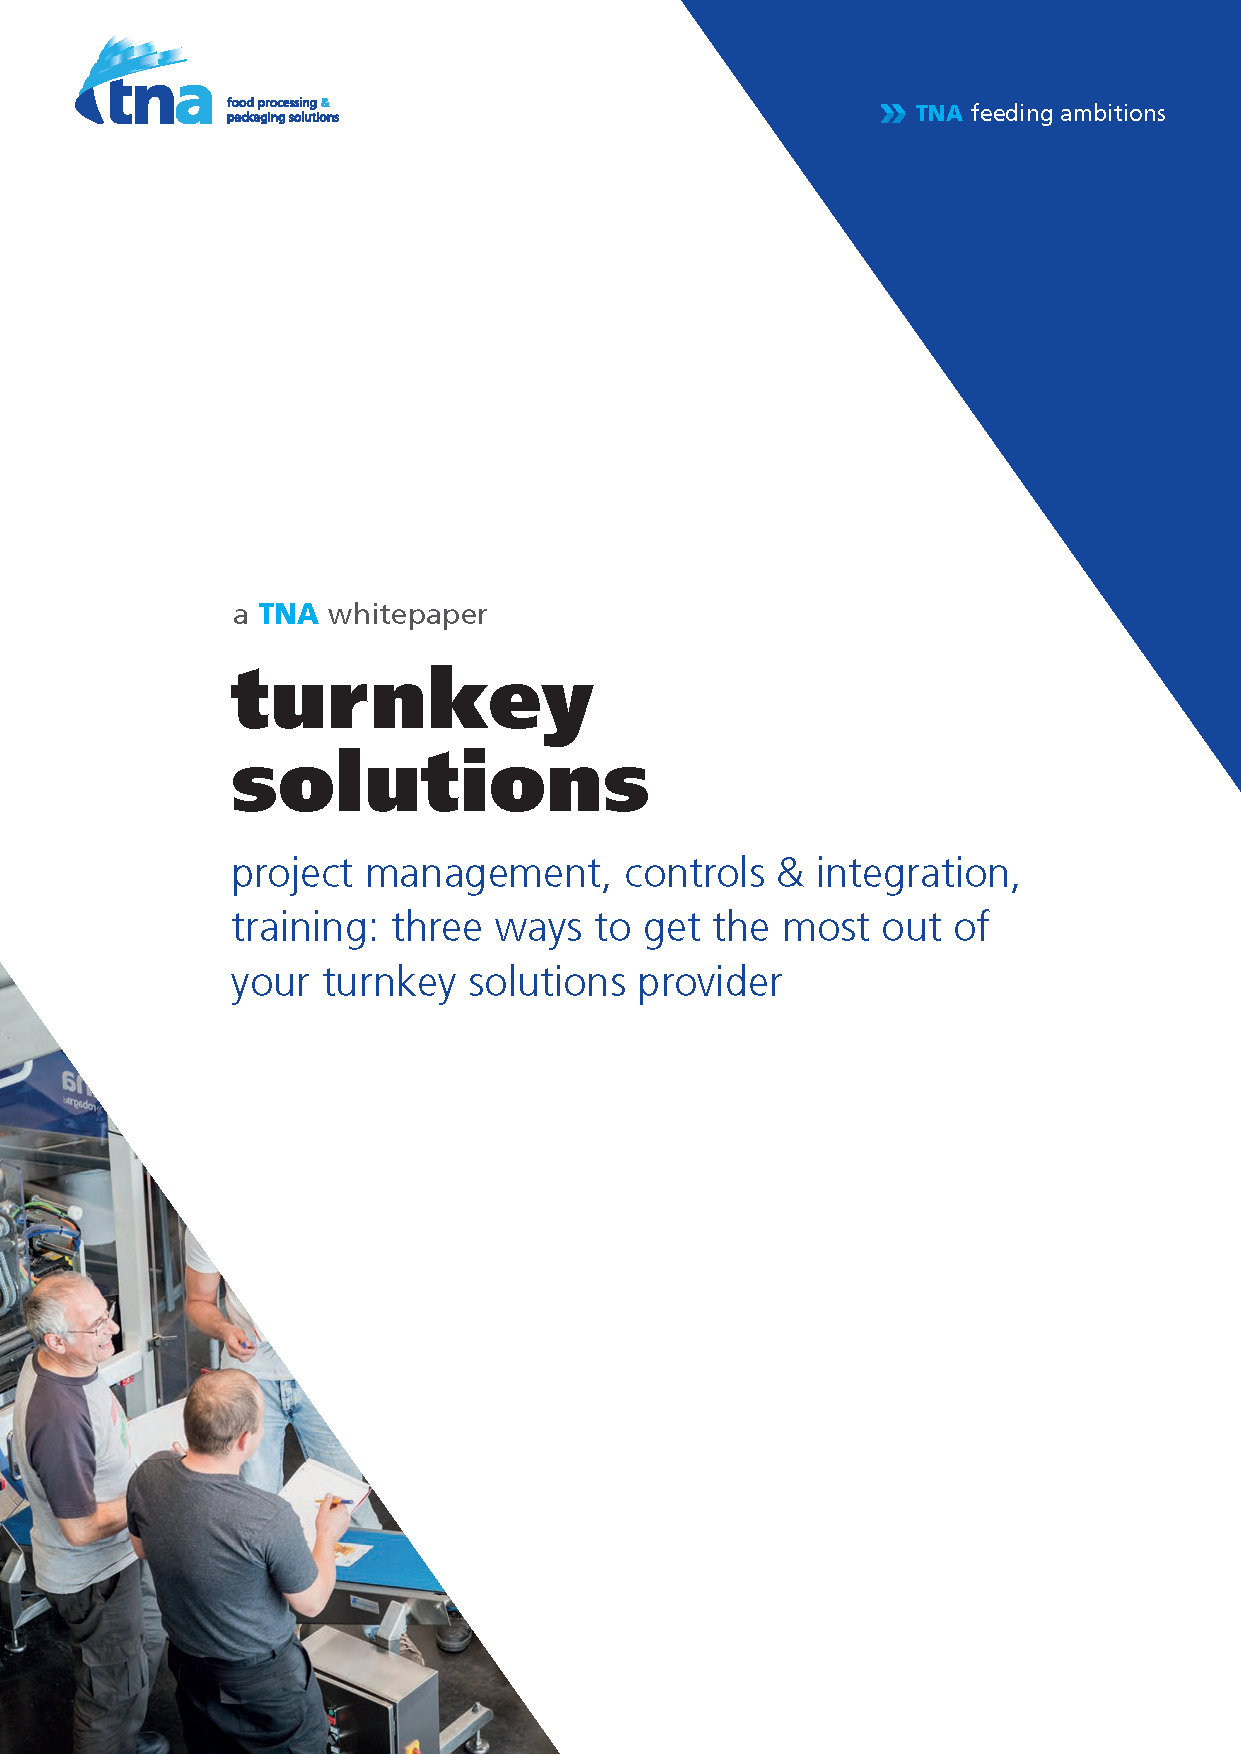 Turnkey Solutions – Project Management, Controls & Integration, Training: 3 Ways to Get the Most Out of Your Turnkey Solutions Provider